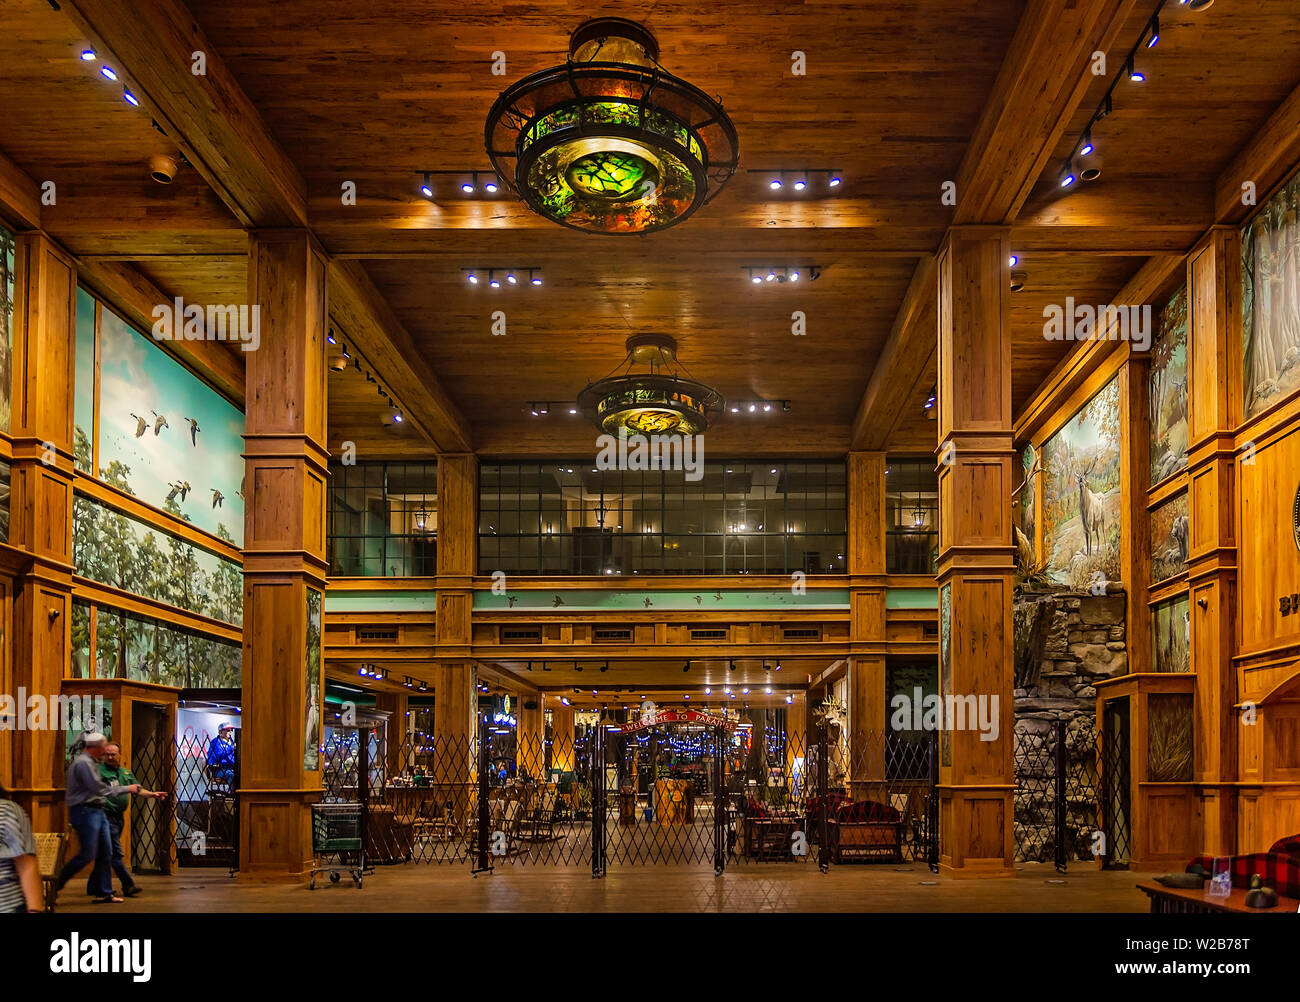 The lobby interior of the Memphis Pyramid and Bass Pro Shops is